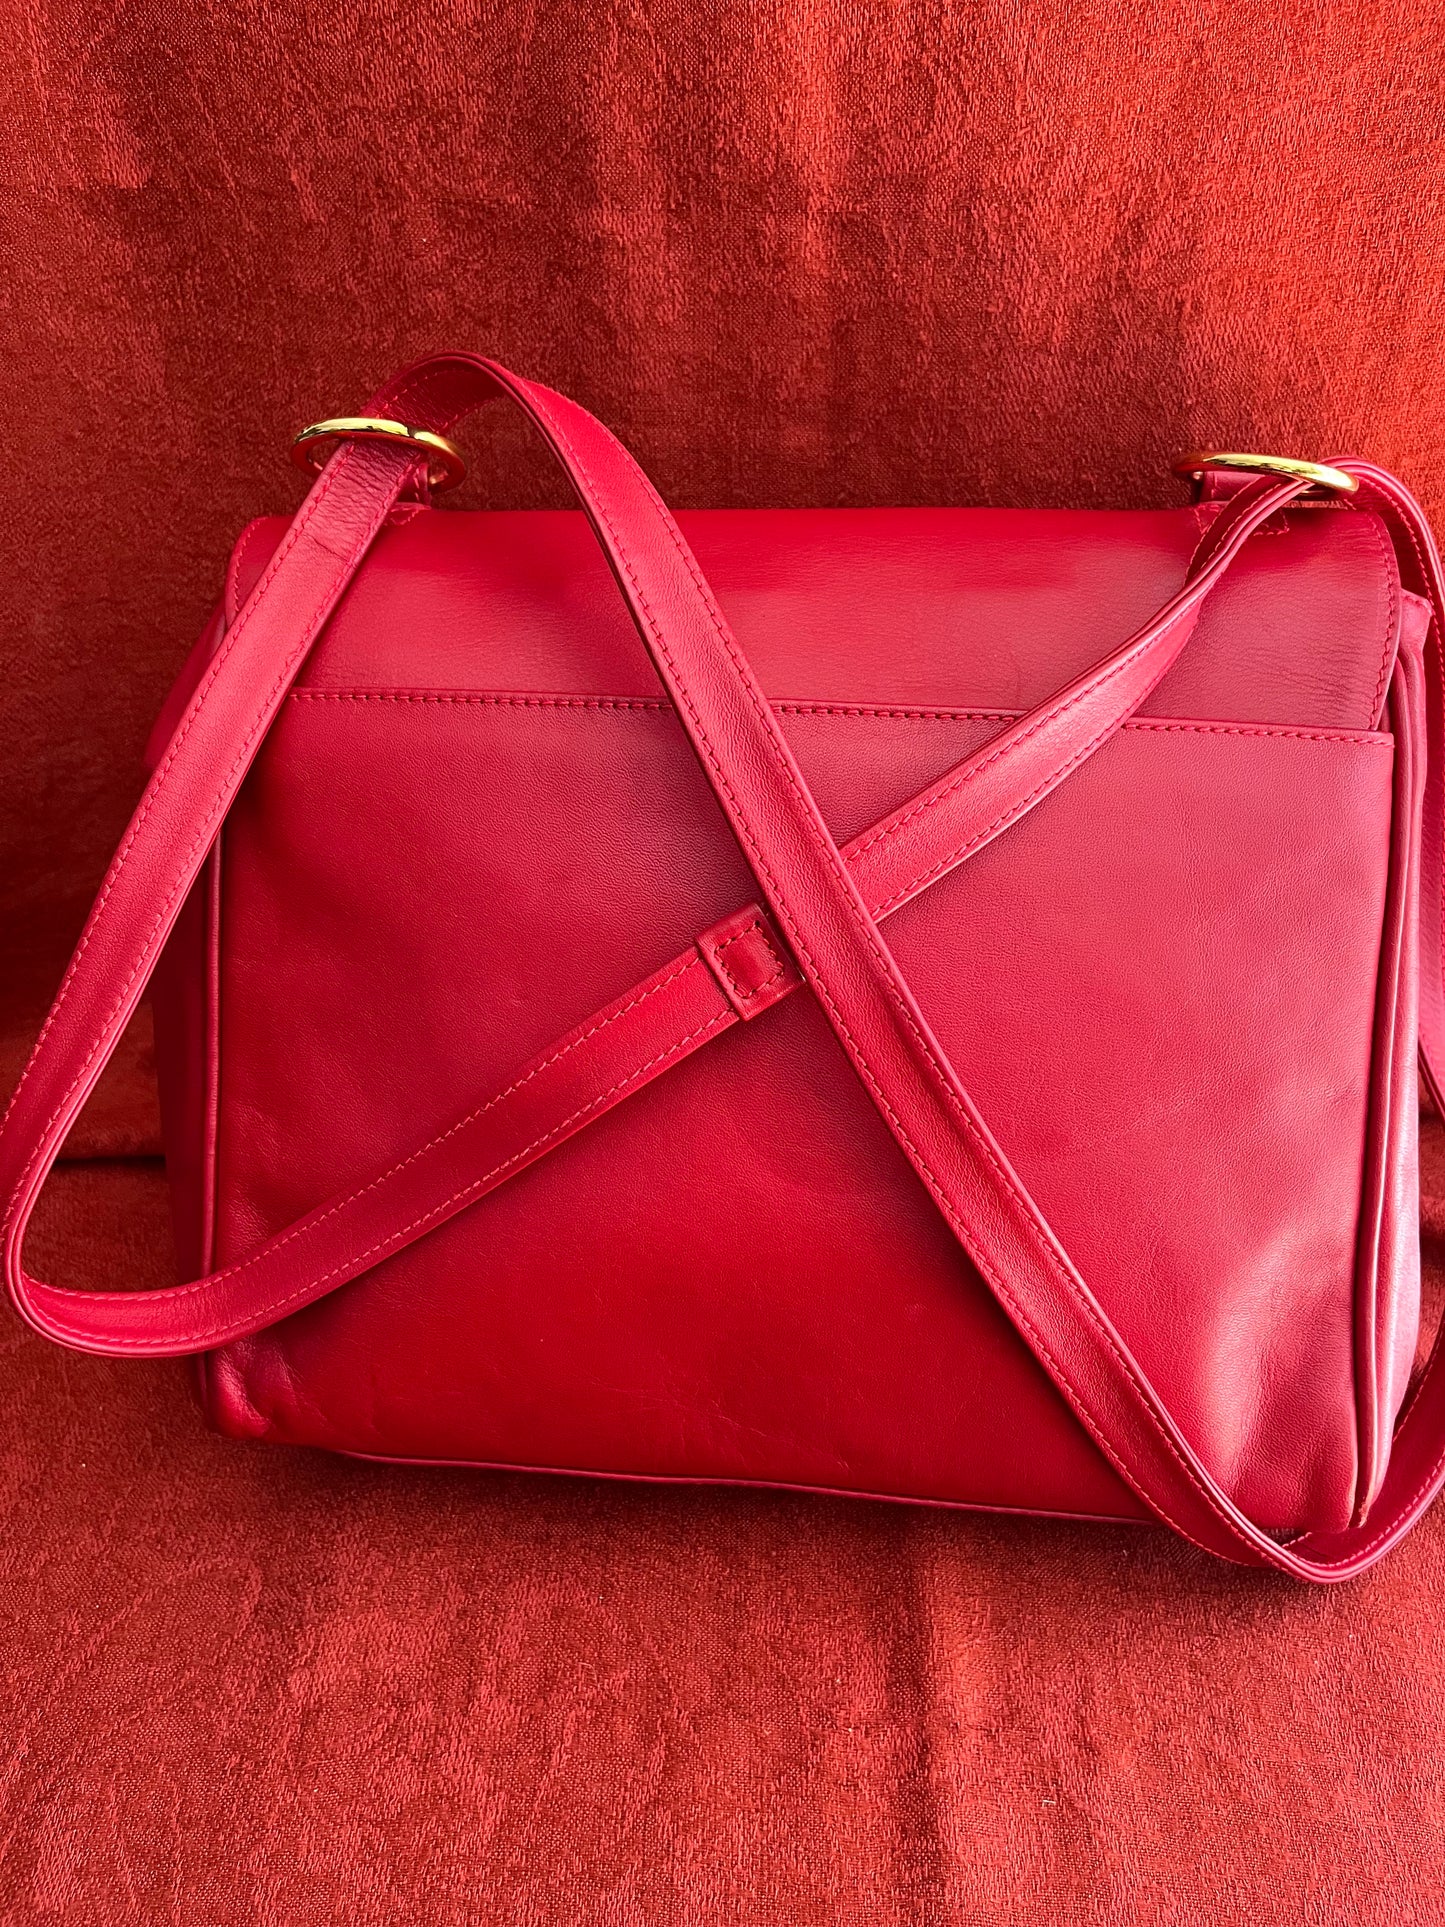 Vintage "By Paloma Picasso" Red Leather Handbag